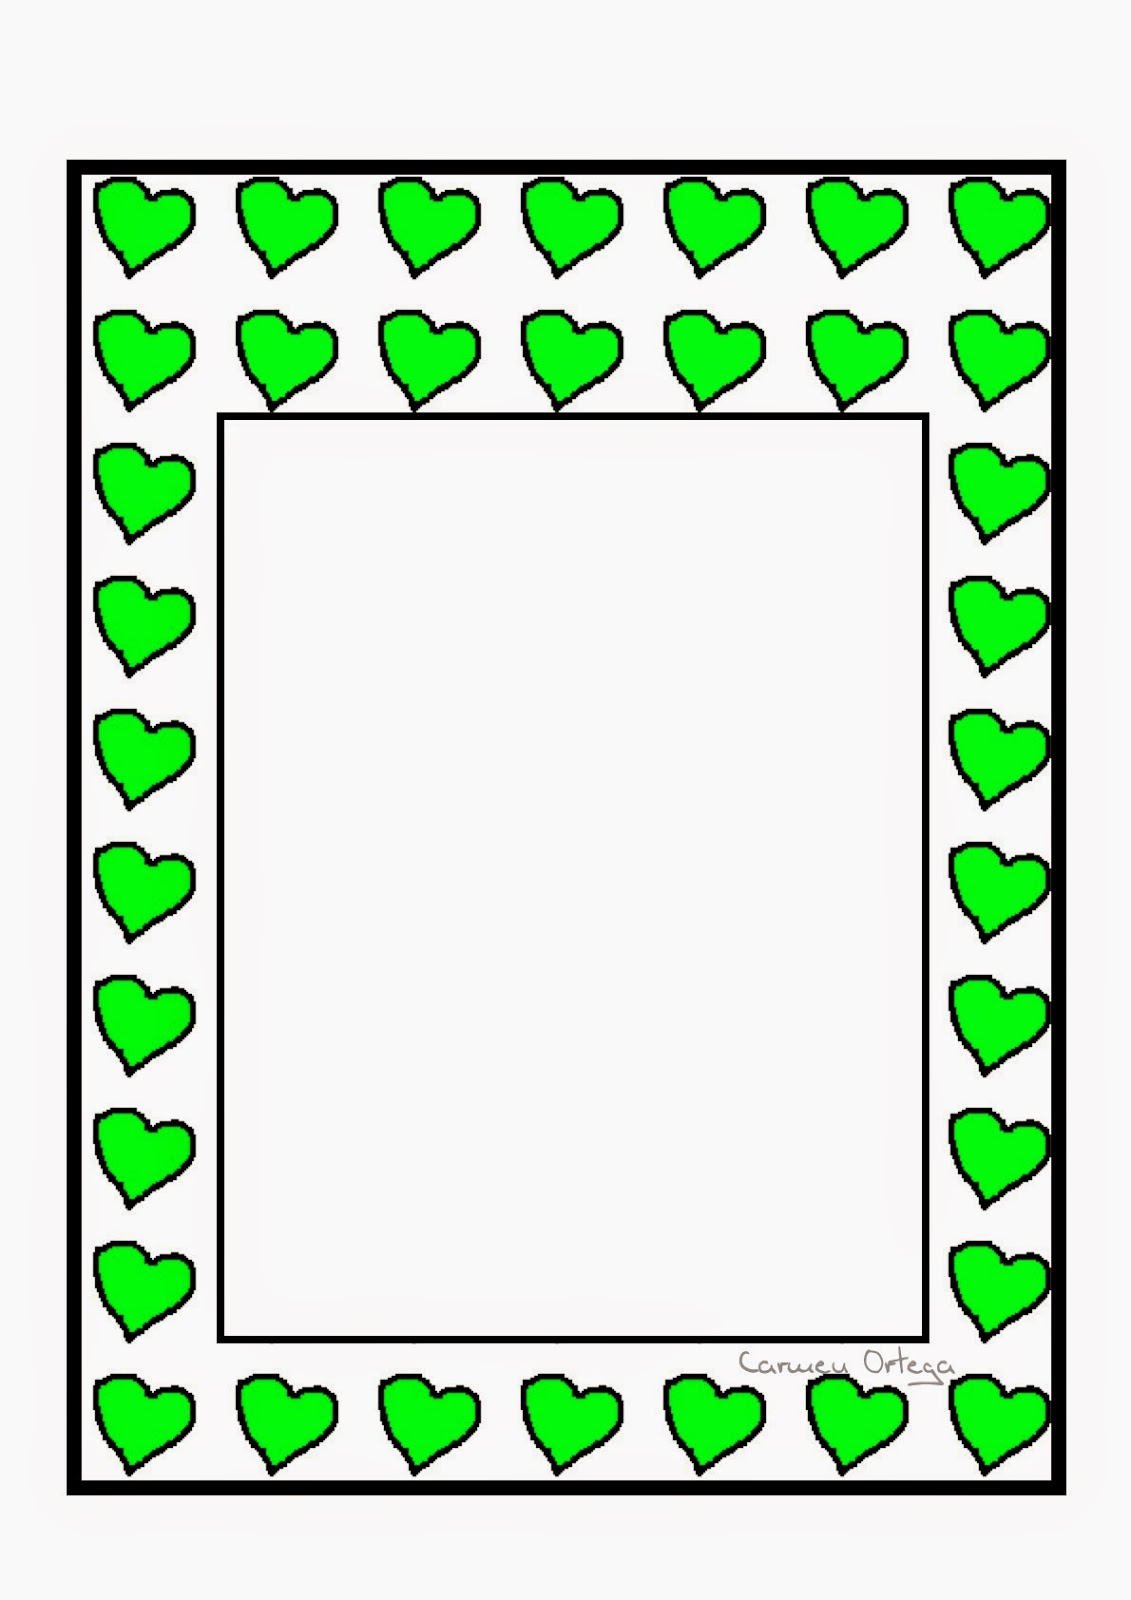 Free Printable Wedding Borders Or Frames With Hearts In 